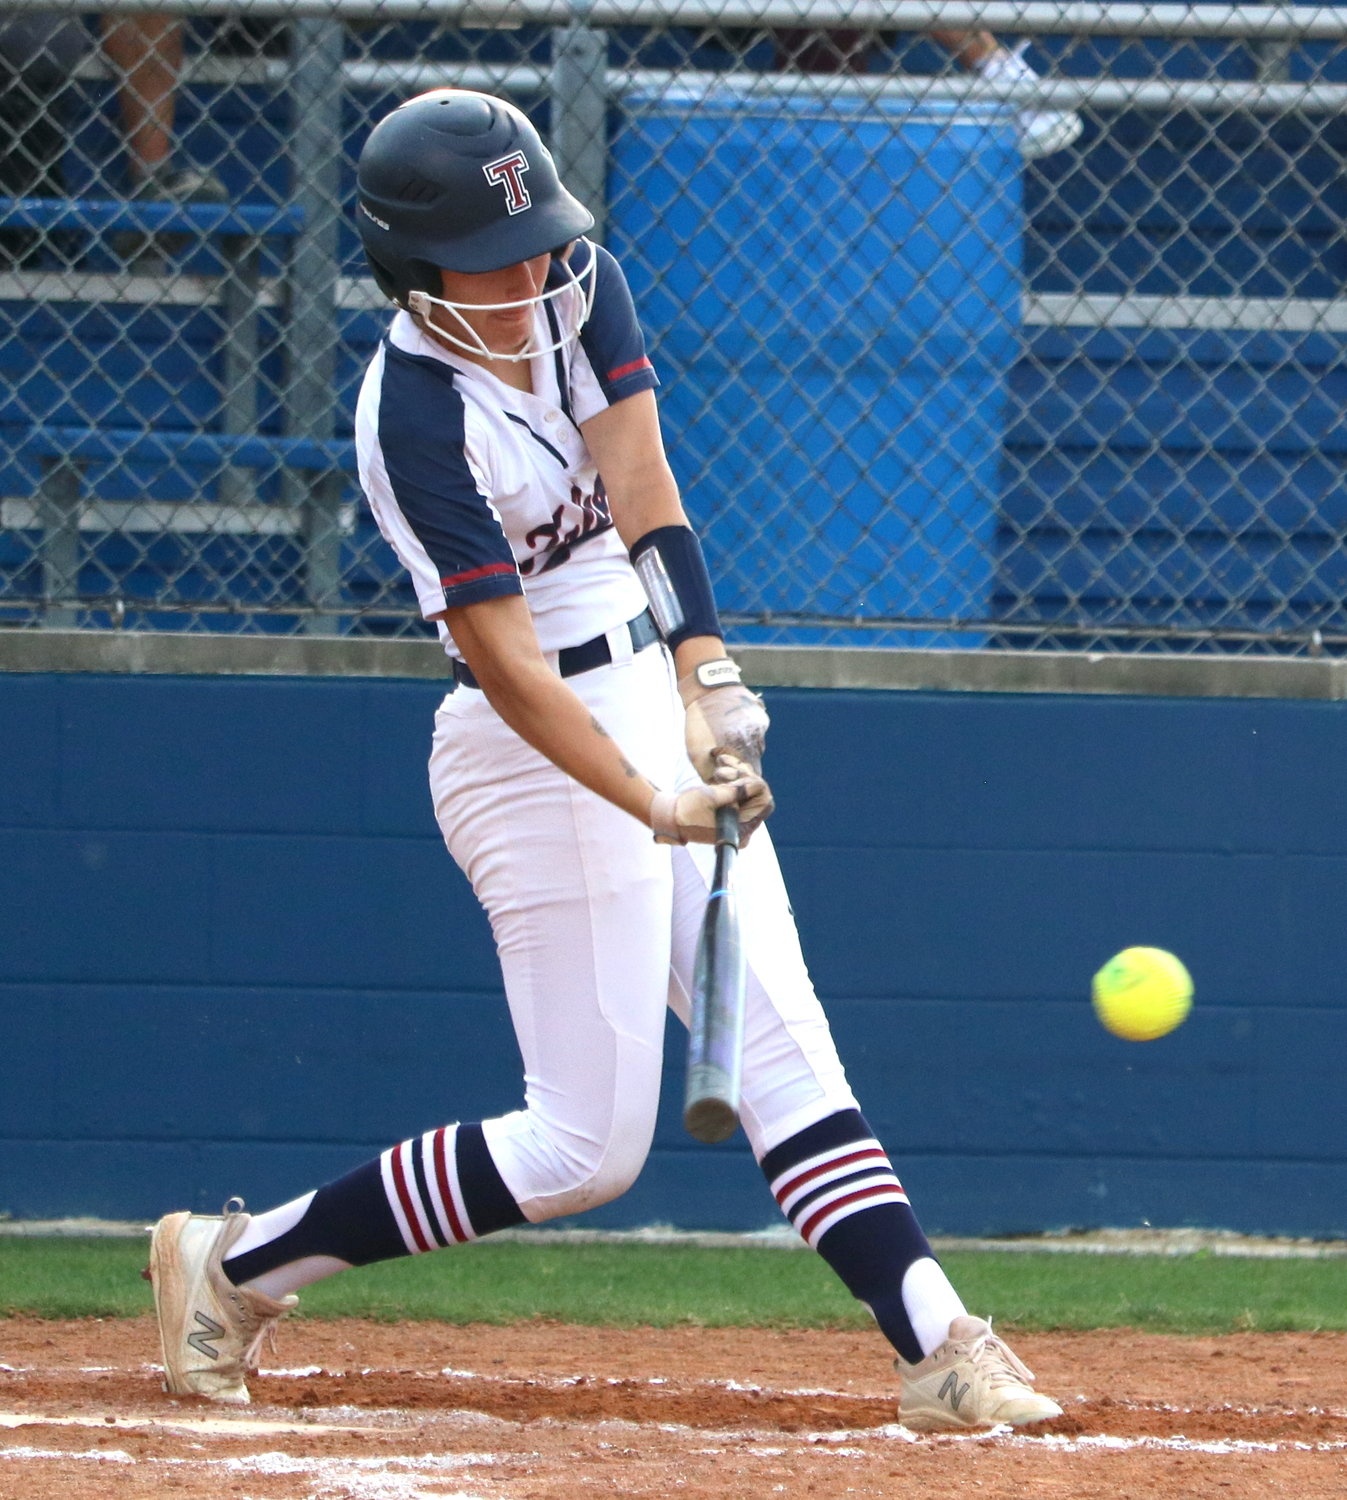 Kennedy Bourque hits during Thursday’s bi-district game between Tompkins and George Ranch at the Tompkins softball field.